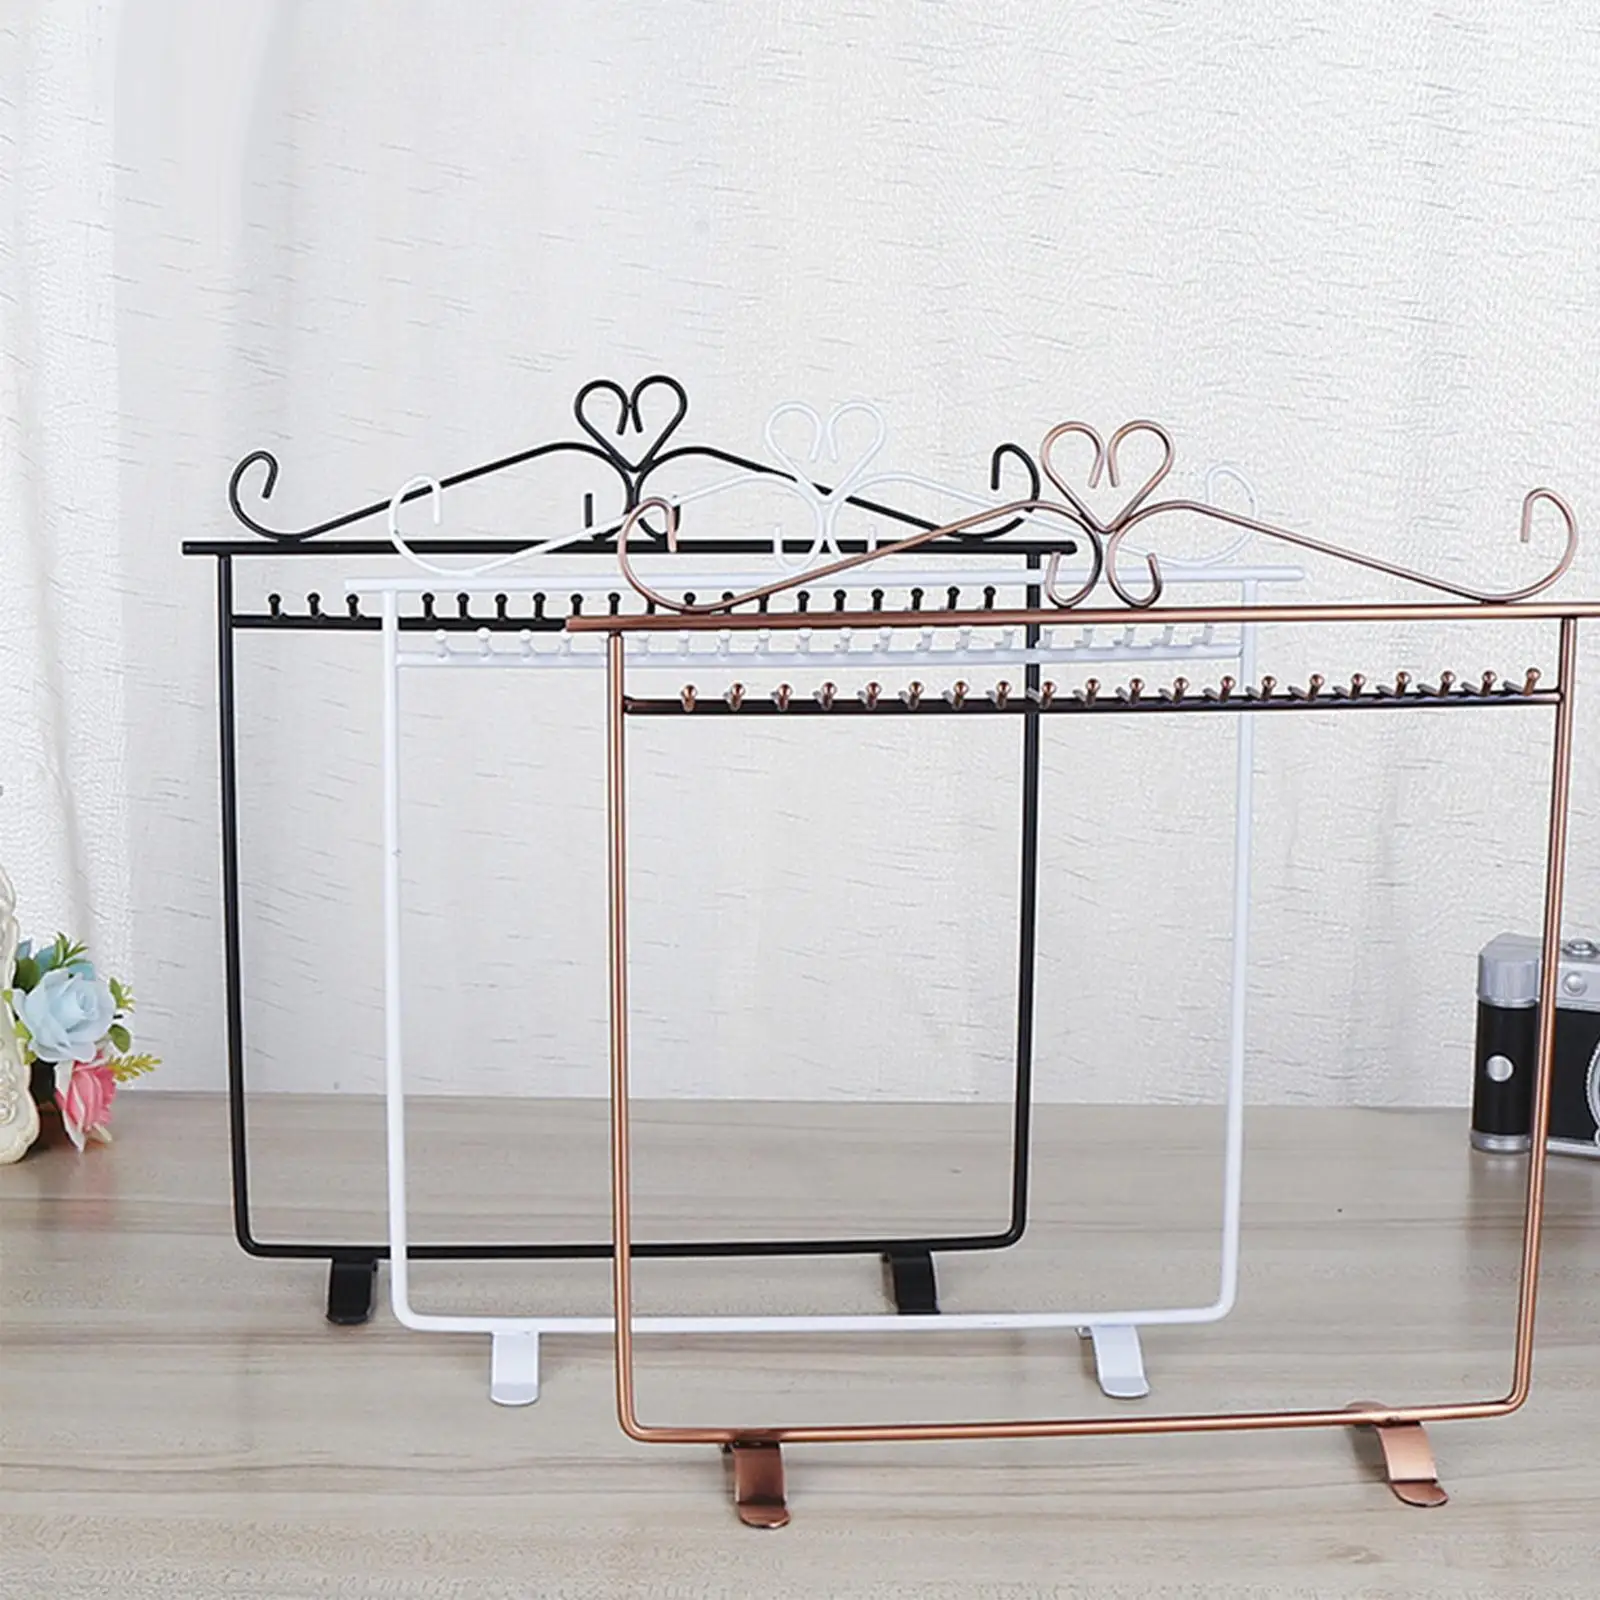 Jewelry Display Rack 20 Hooks Storage Holder Craft Shows Ring Bangles Hanger Earring Organizer Tabletop Stand Necklaces Hanging